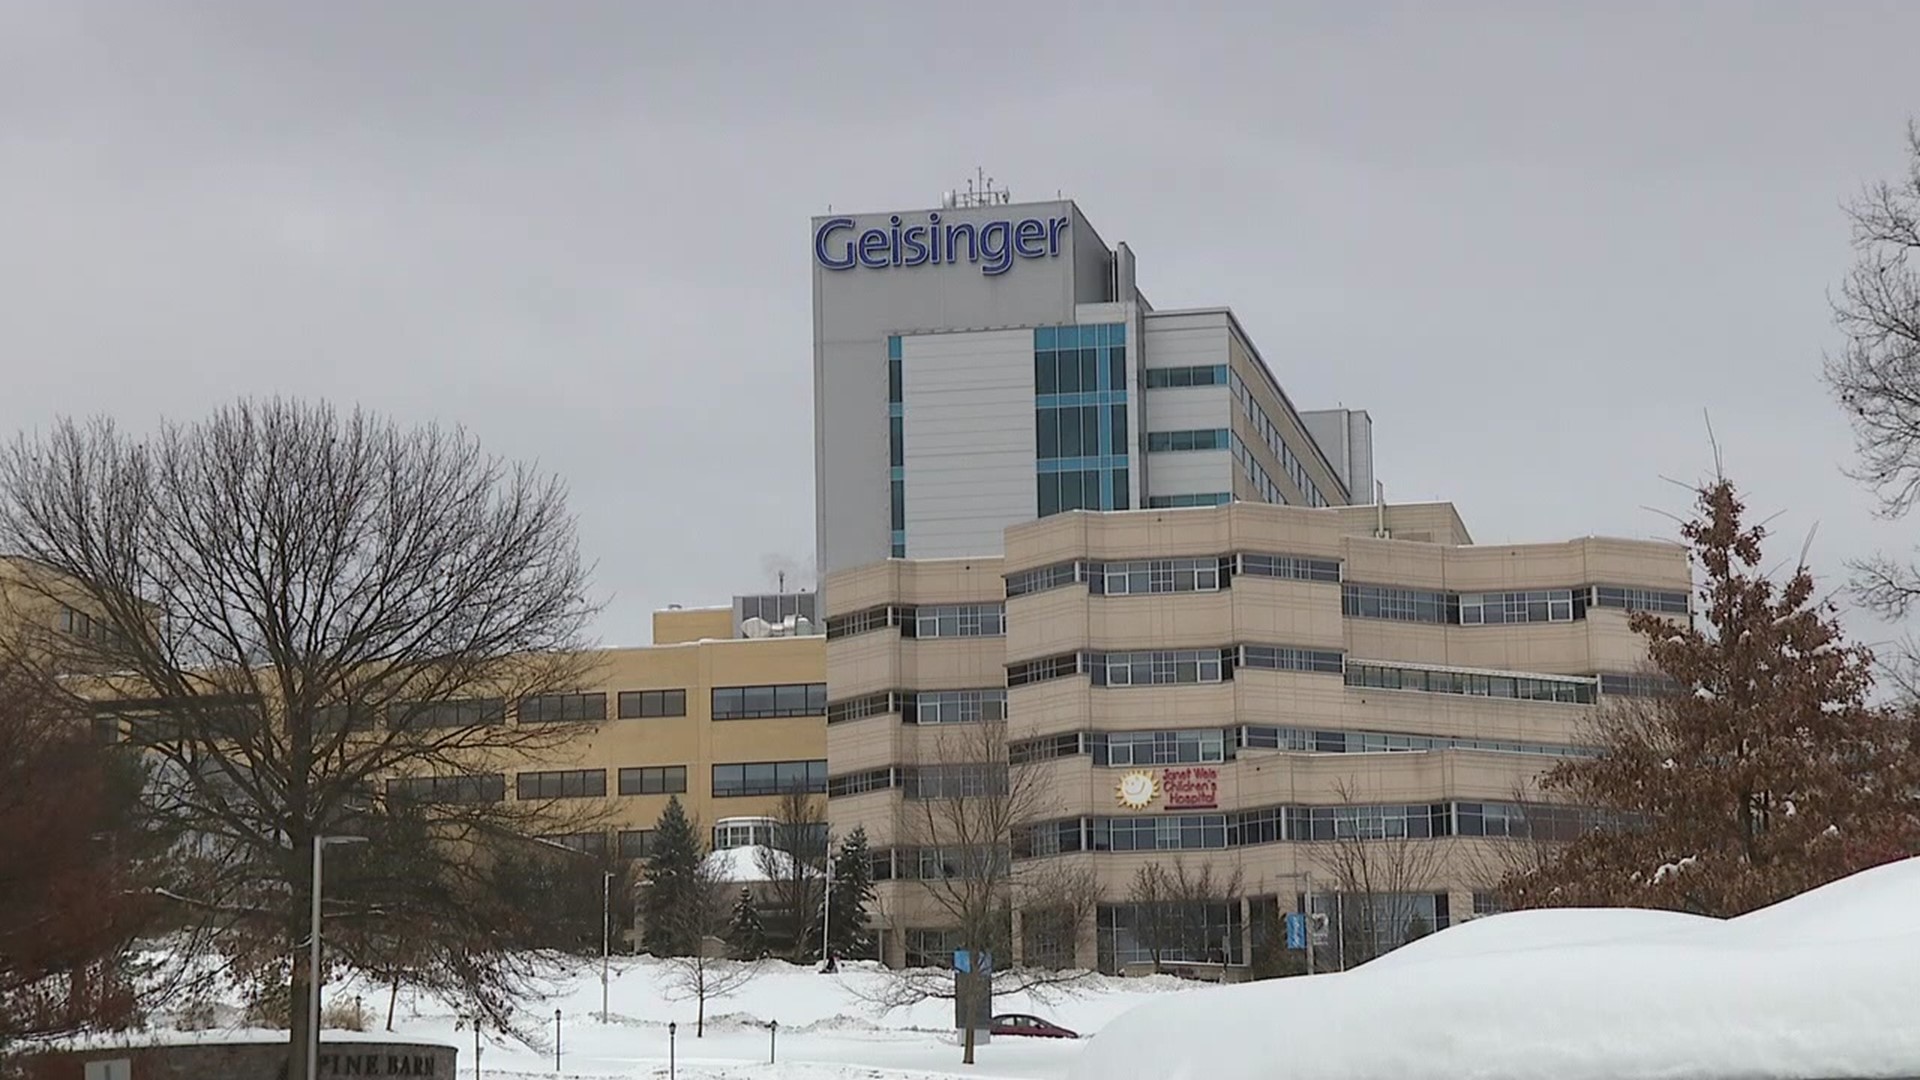 Workers throughout Geisinger Health System are dealing with rising cases of the coronavirus.